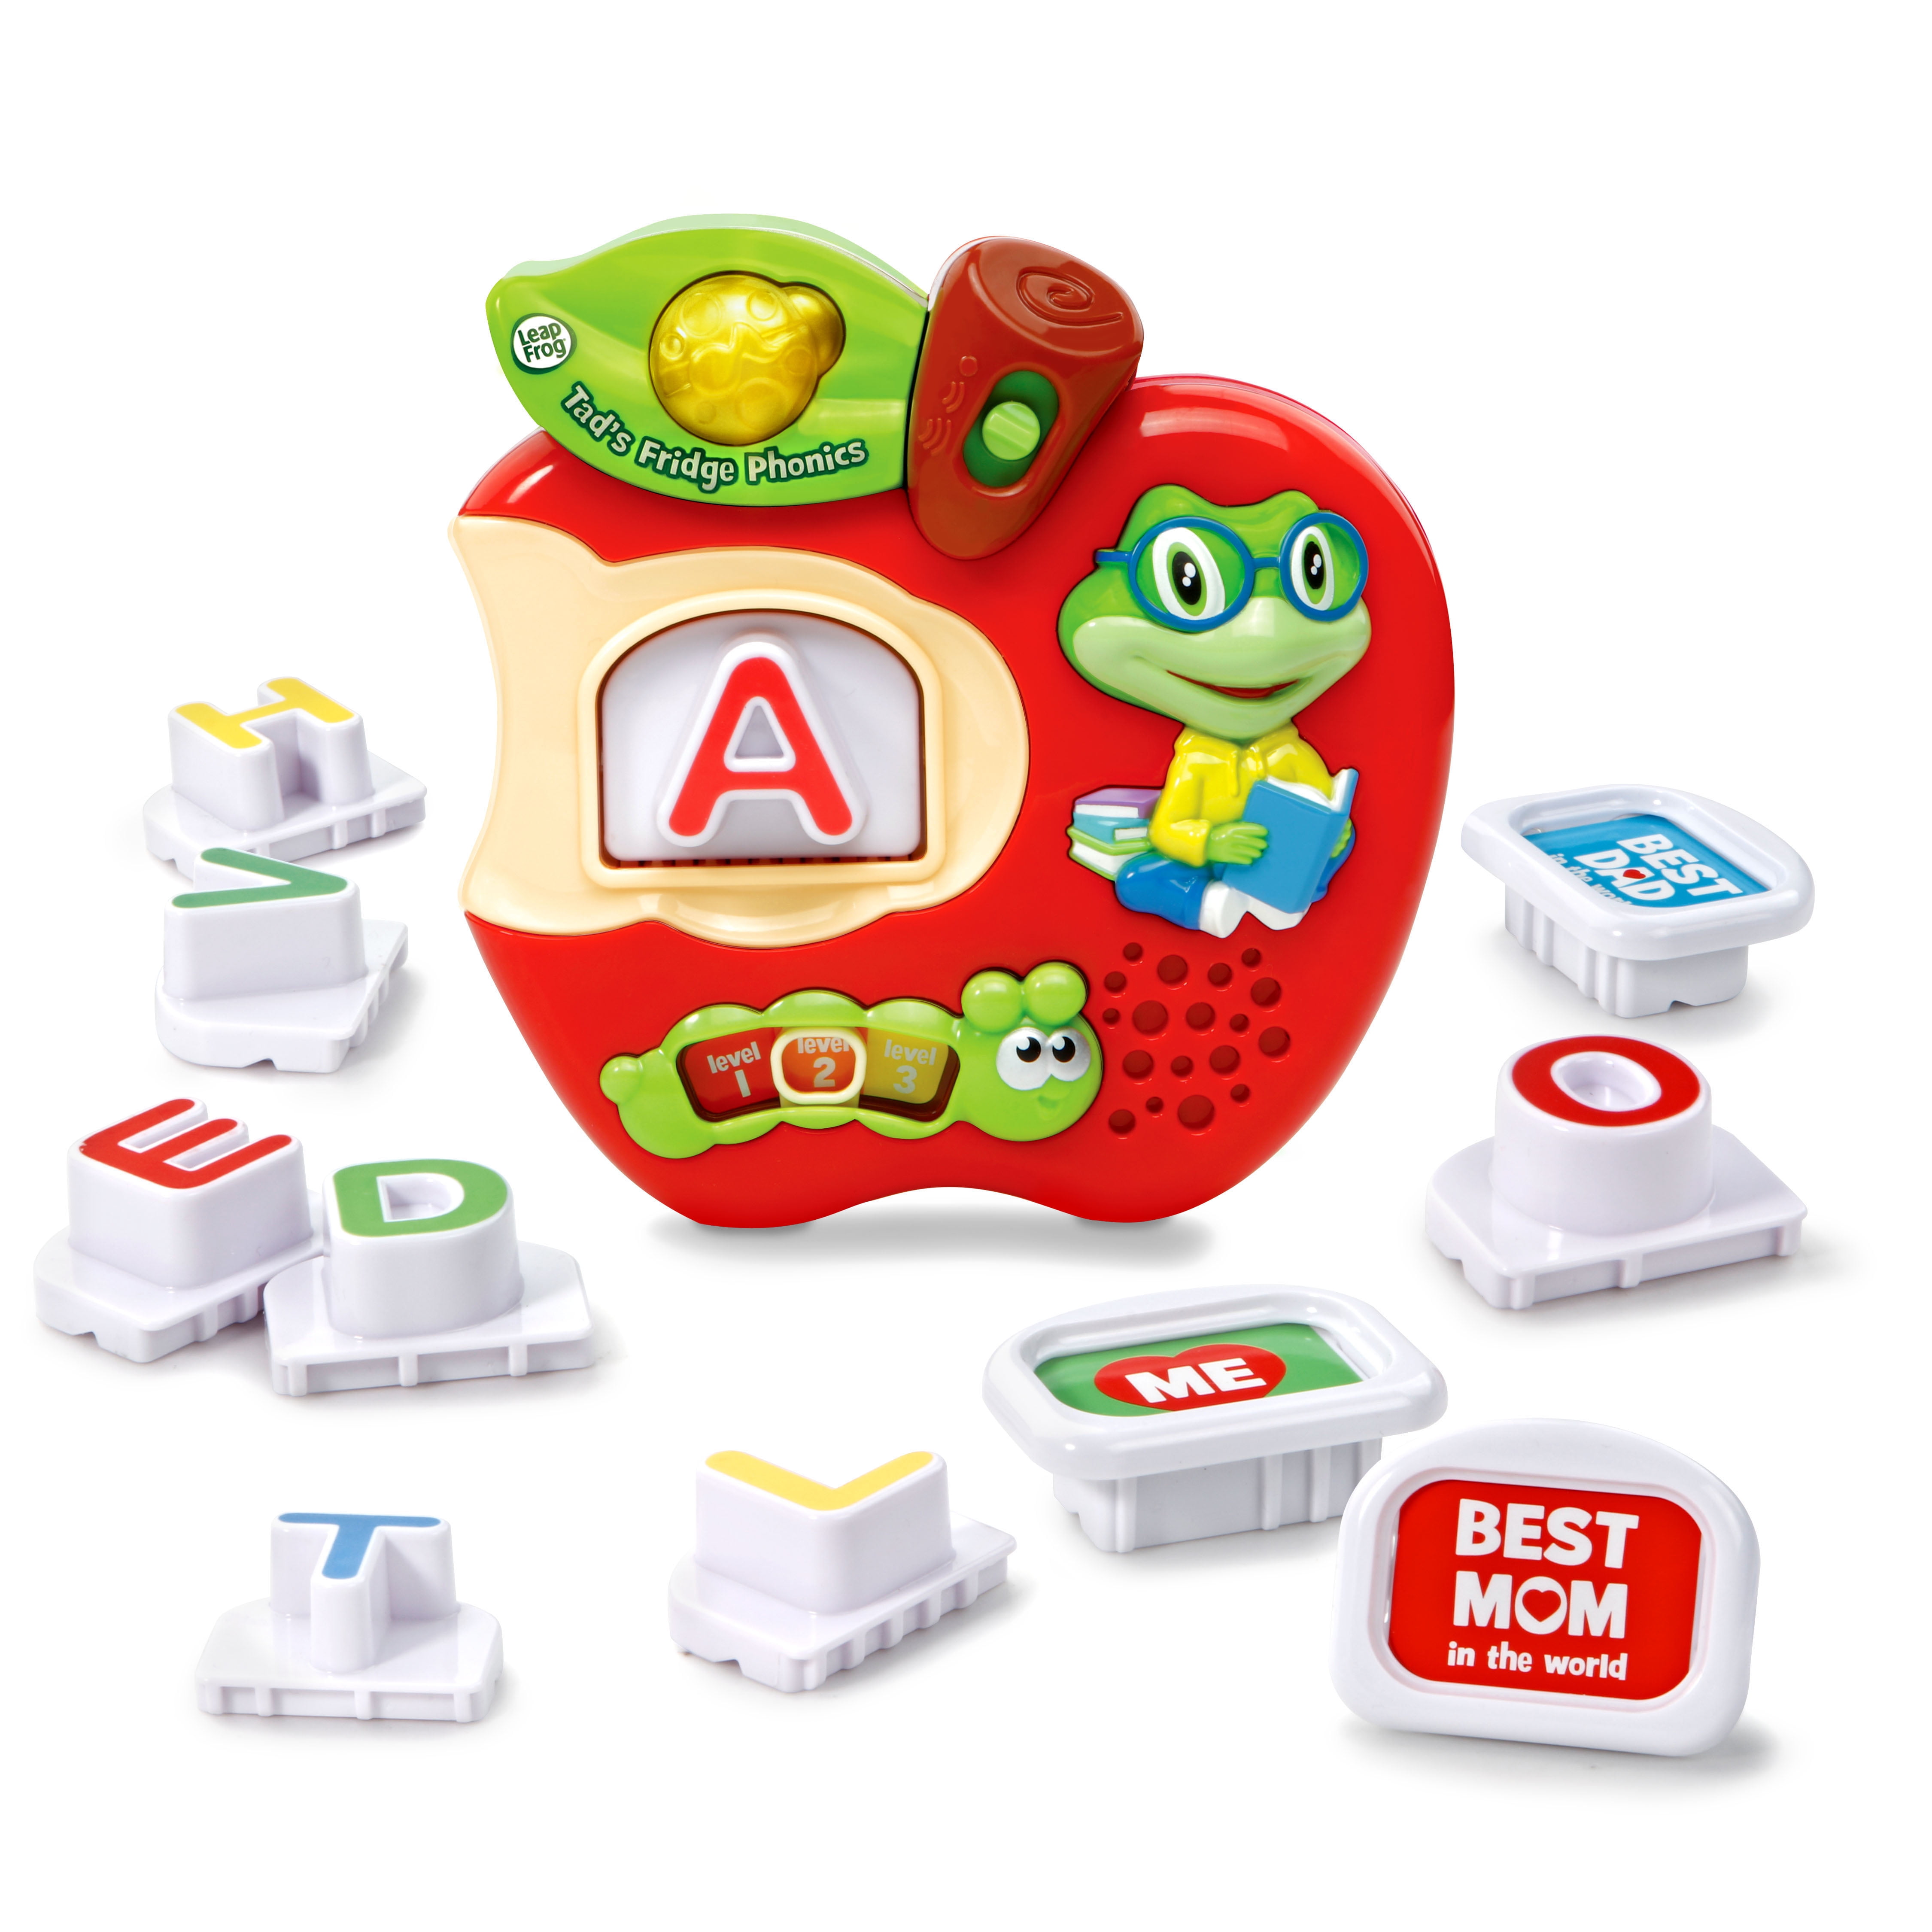 Details about   LEAPFROG NEW Tad's Fridge Phonics Teaches LETTERS and PHONICS 3 DAYS DELIVERY 